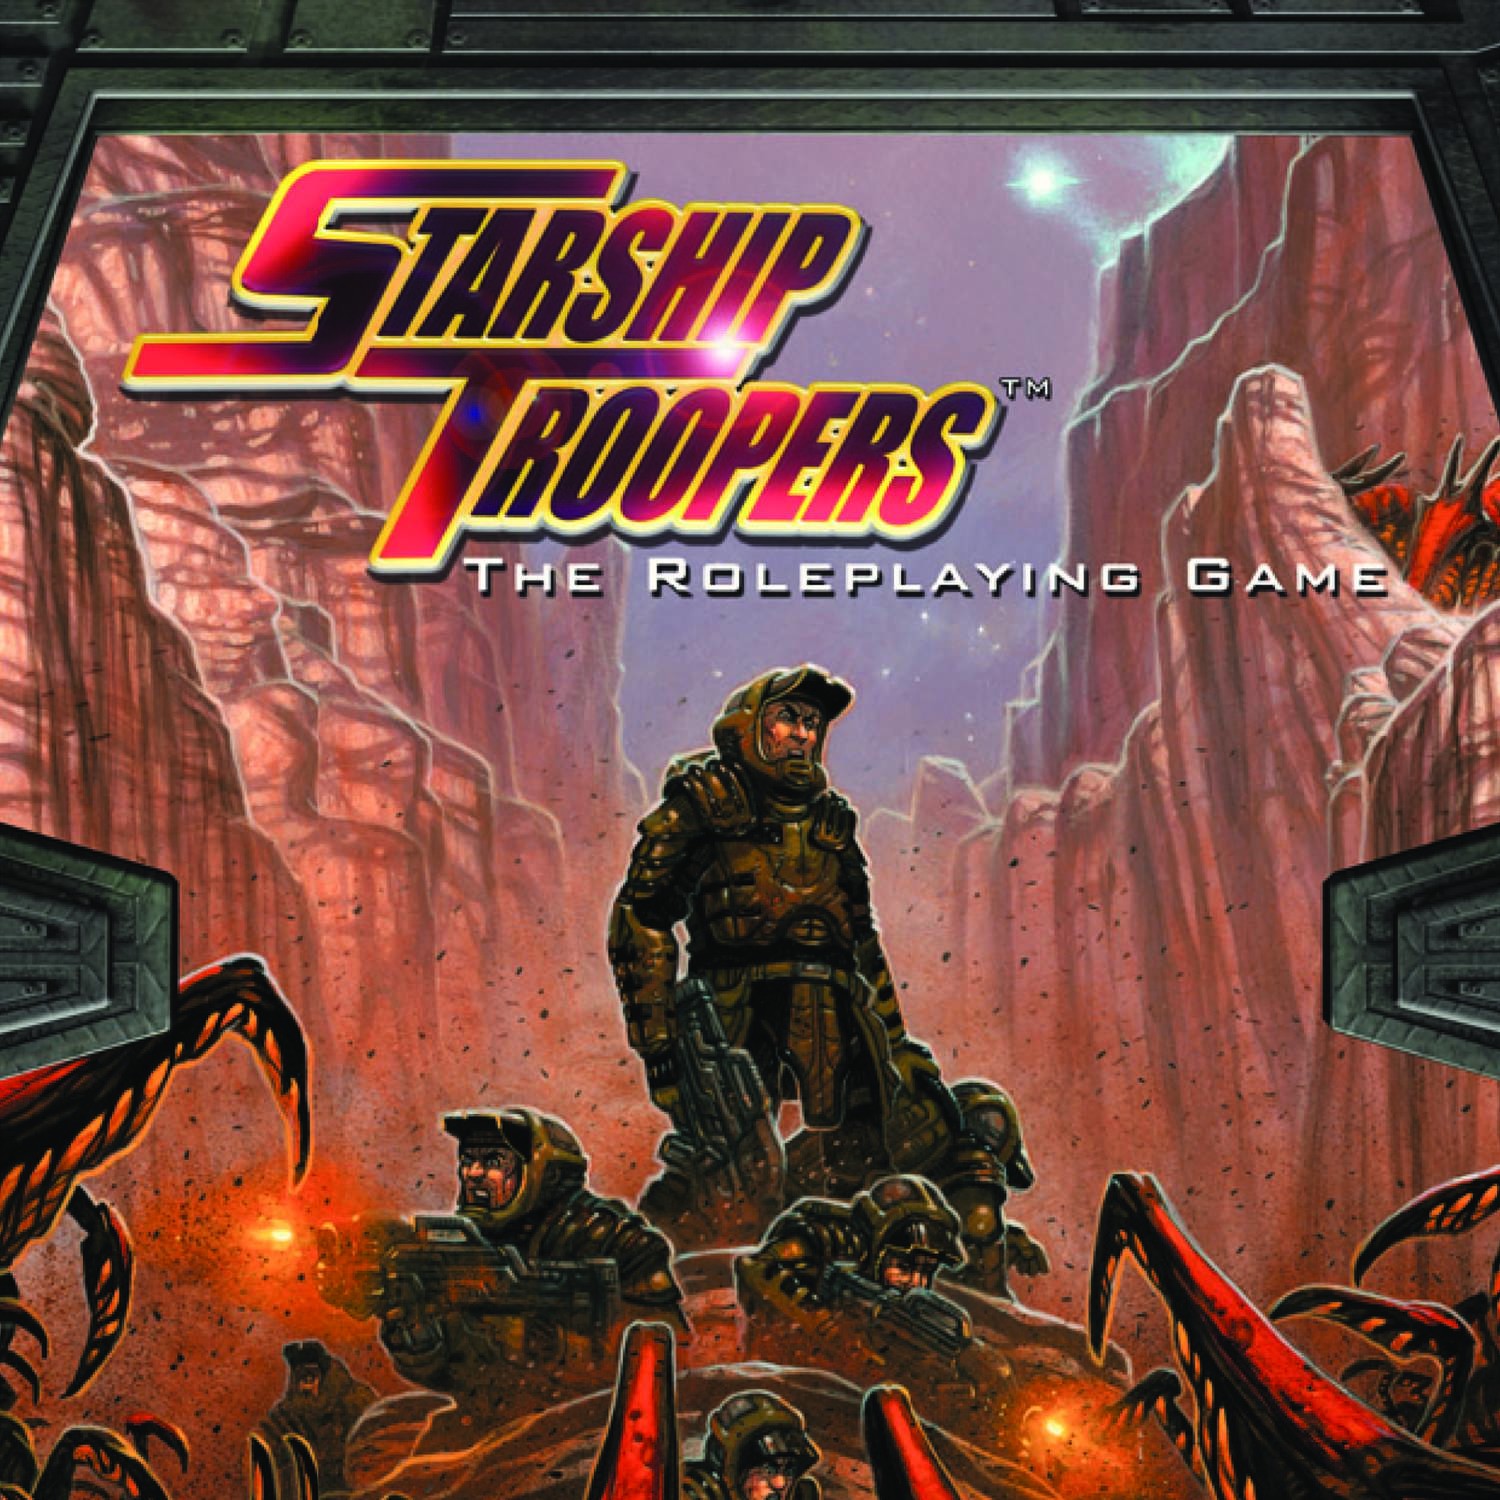 STARSHIP TROOPERS The Roleplaying Game POCKET EDITION 2006 D20 MGP 9208 SC NEW! 